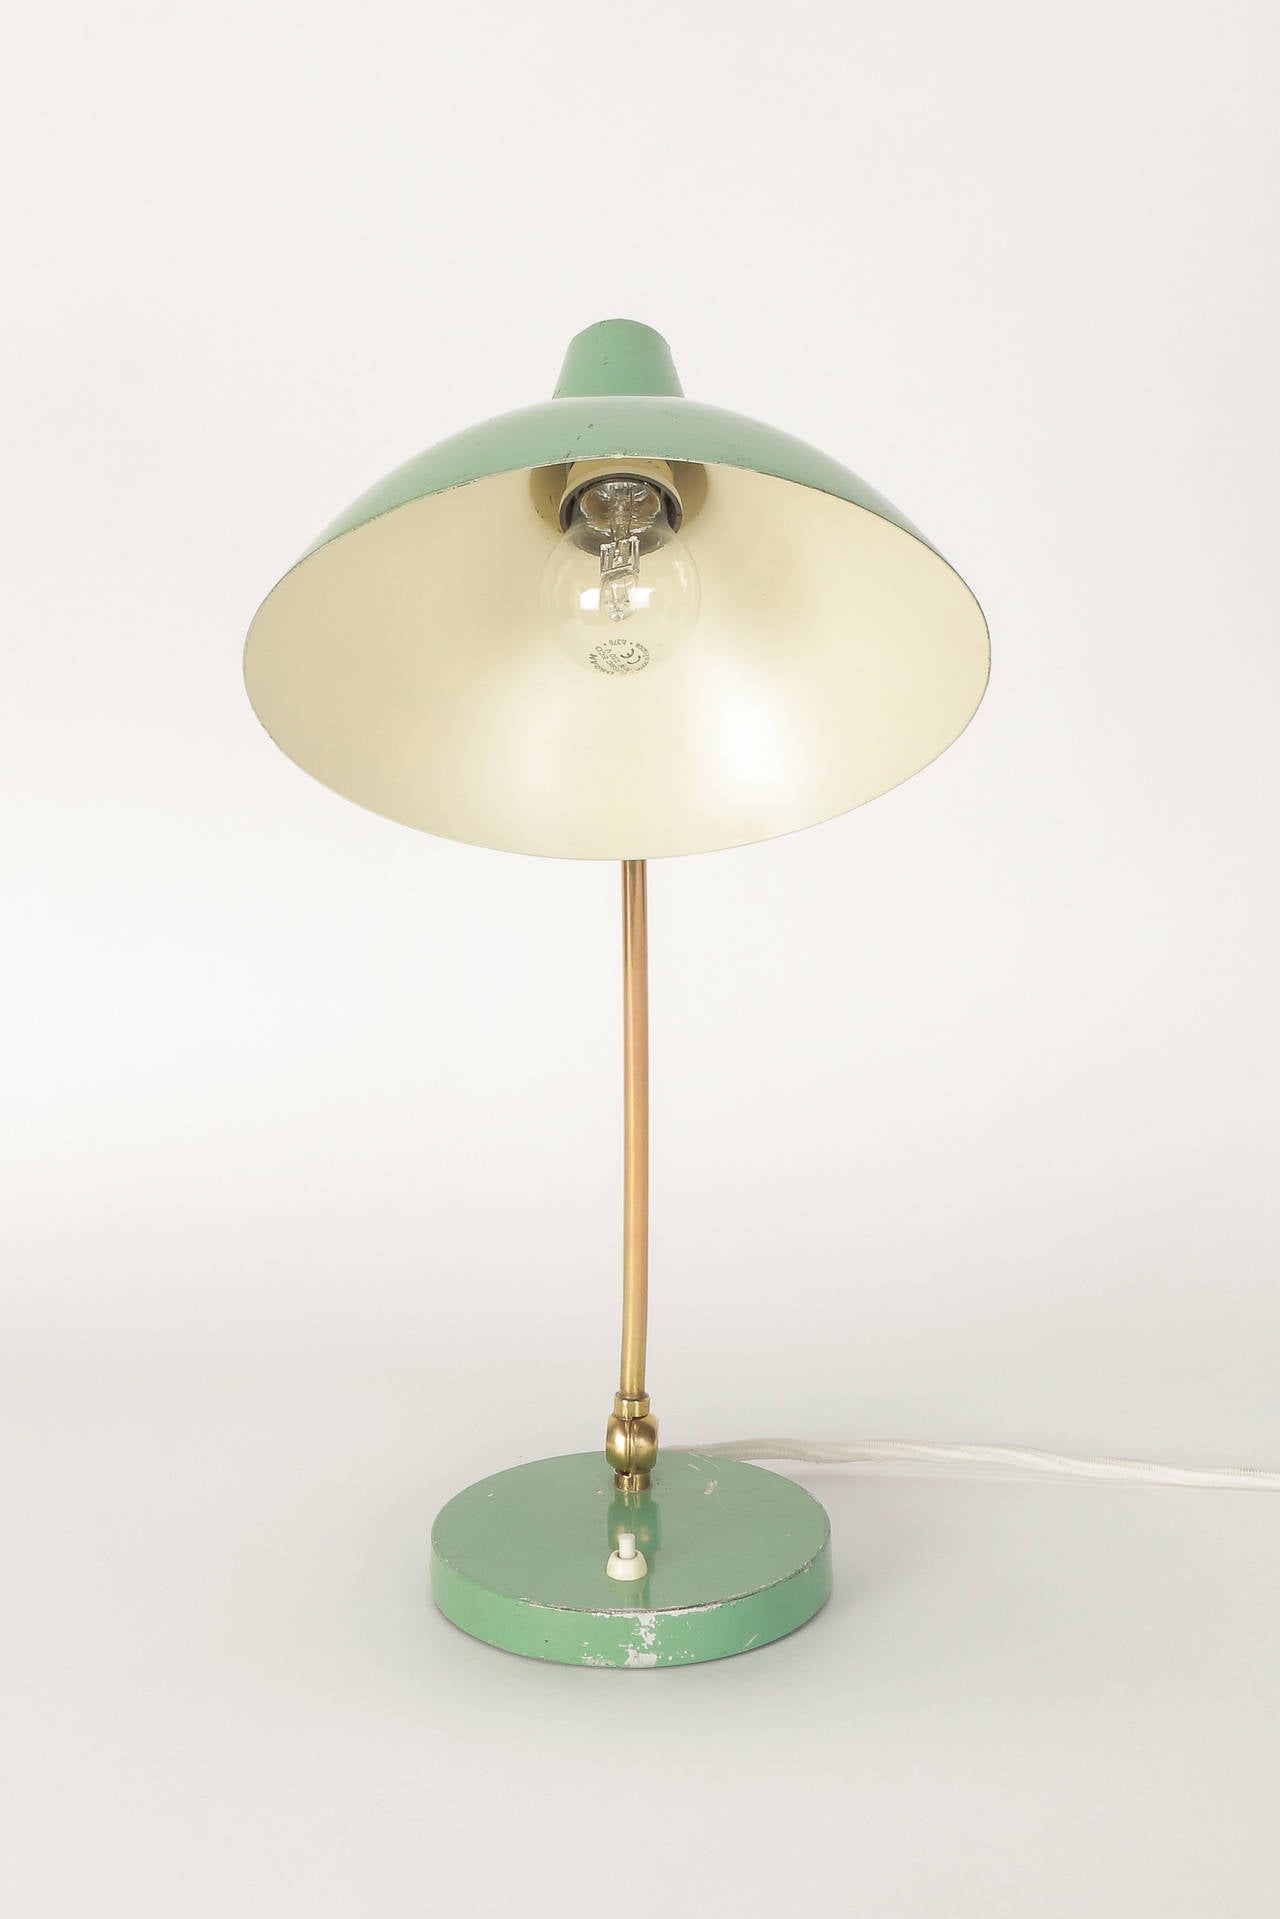 Lacquered Swiss Desk Lamp by Alfred Mueller for Amba, 1950s